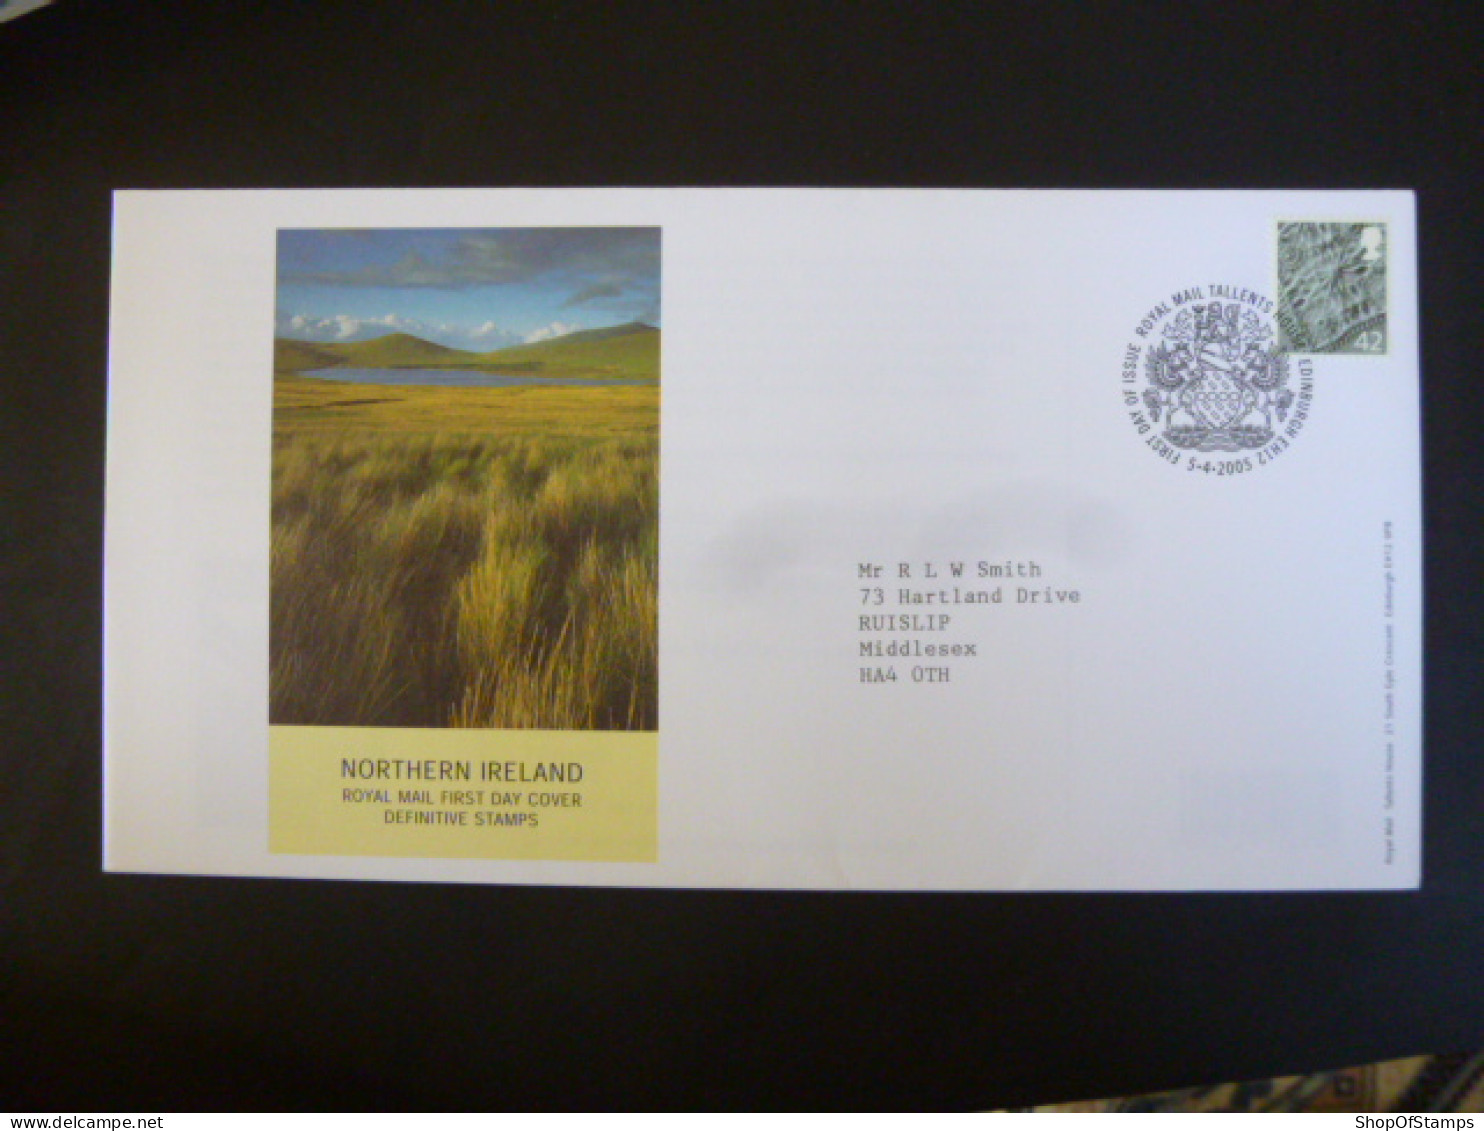 GREAT BRITAIN SG NI98 FDC ROYAL MAIL TALENT HOUSE EDINBURGH - Unclassified